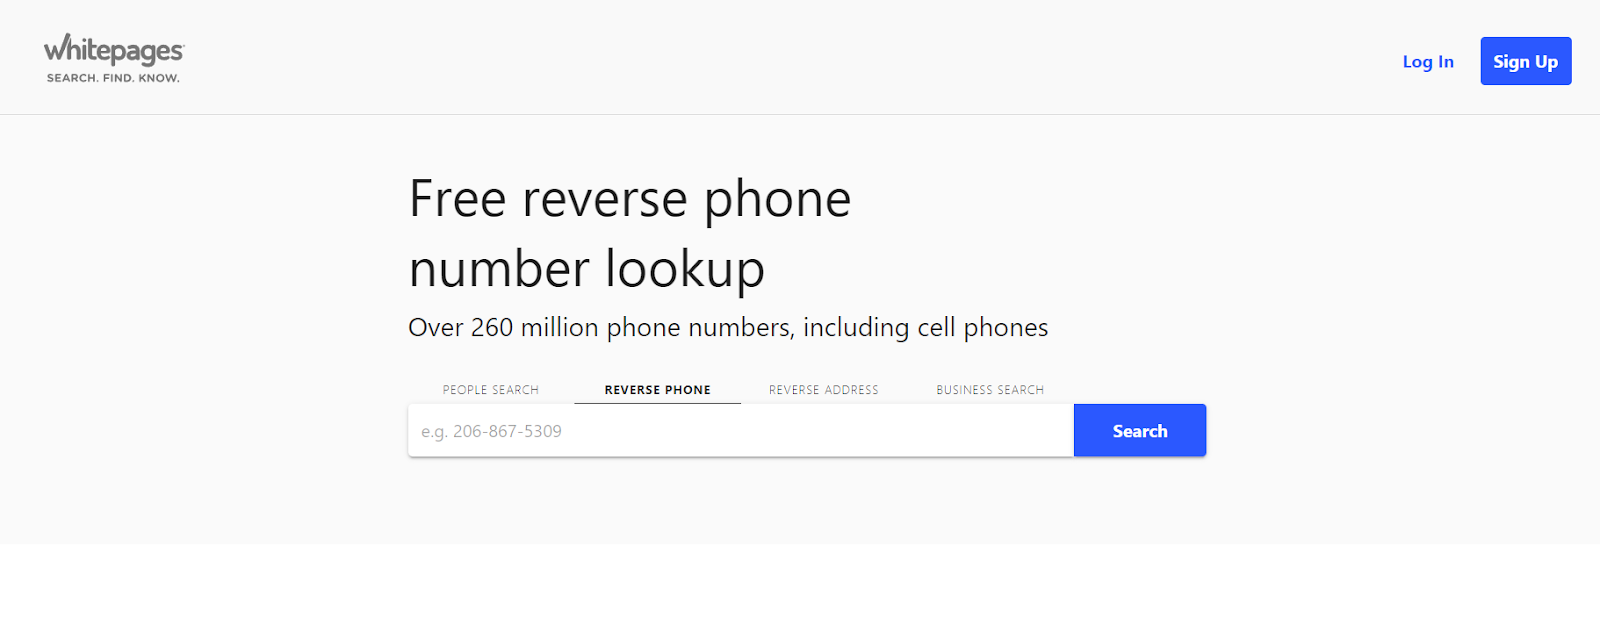 Reverse Phone Lookup is created by Whitepages